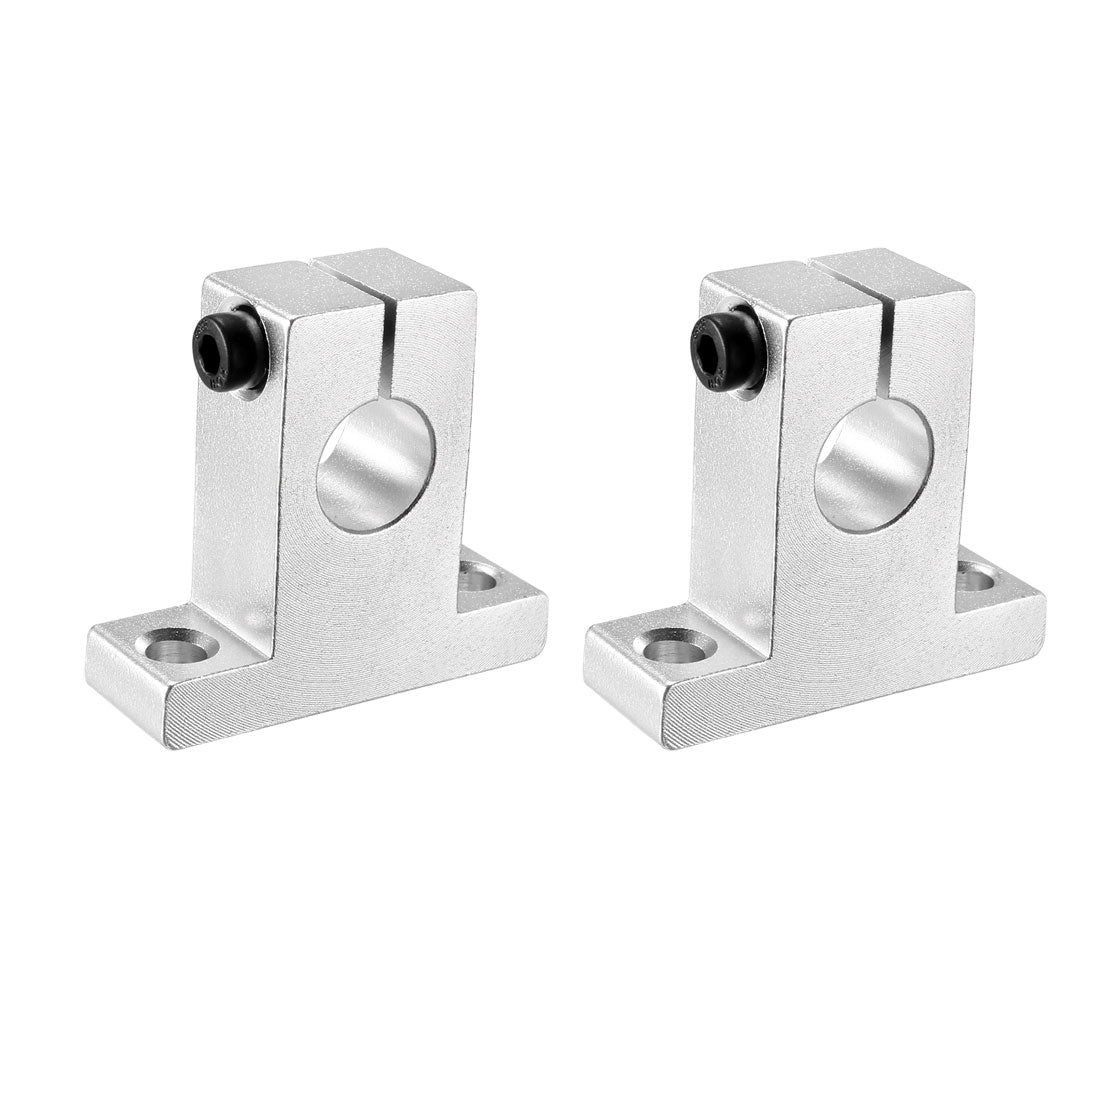 uxcell Uxcell 2PCS SK12 Linear Motion Rail Clamping Rod Rail Guide Support for 12mm Dia Shaft